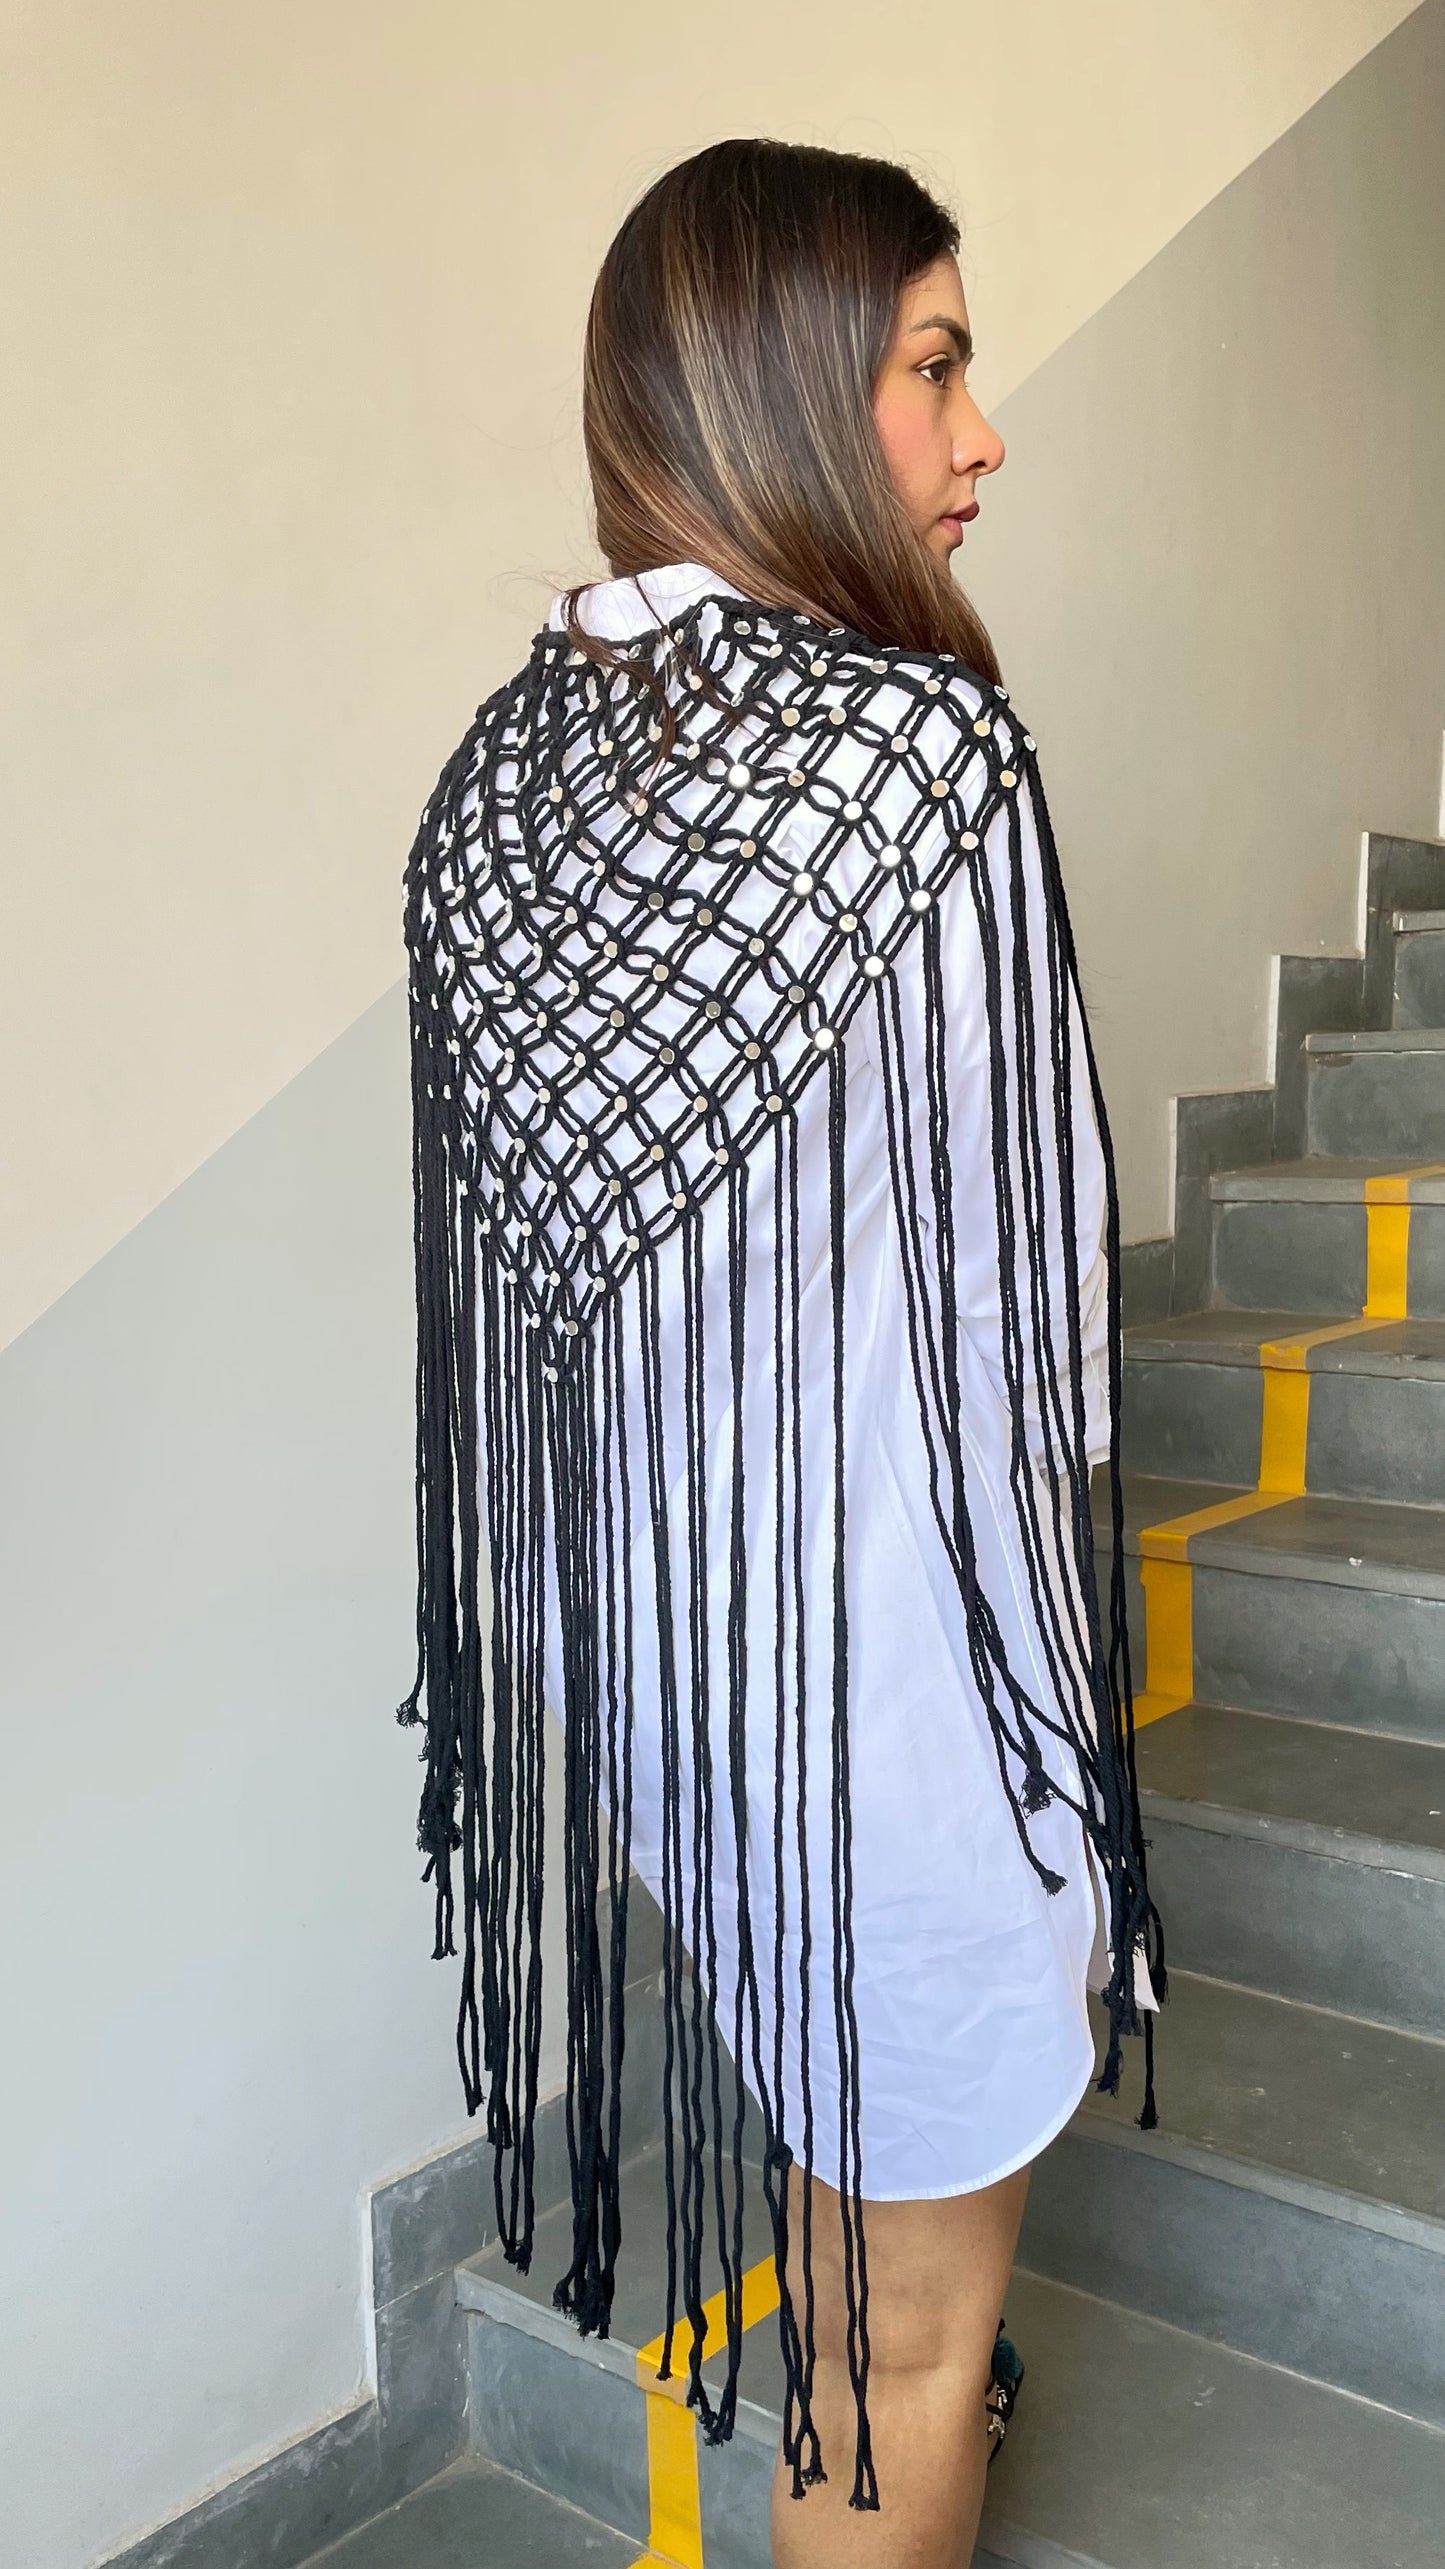 Ray Shawl/Skirt Cover Up